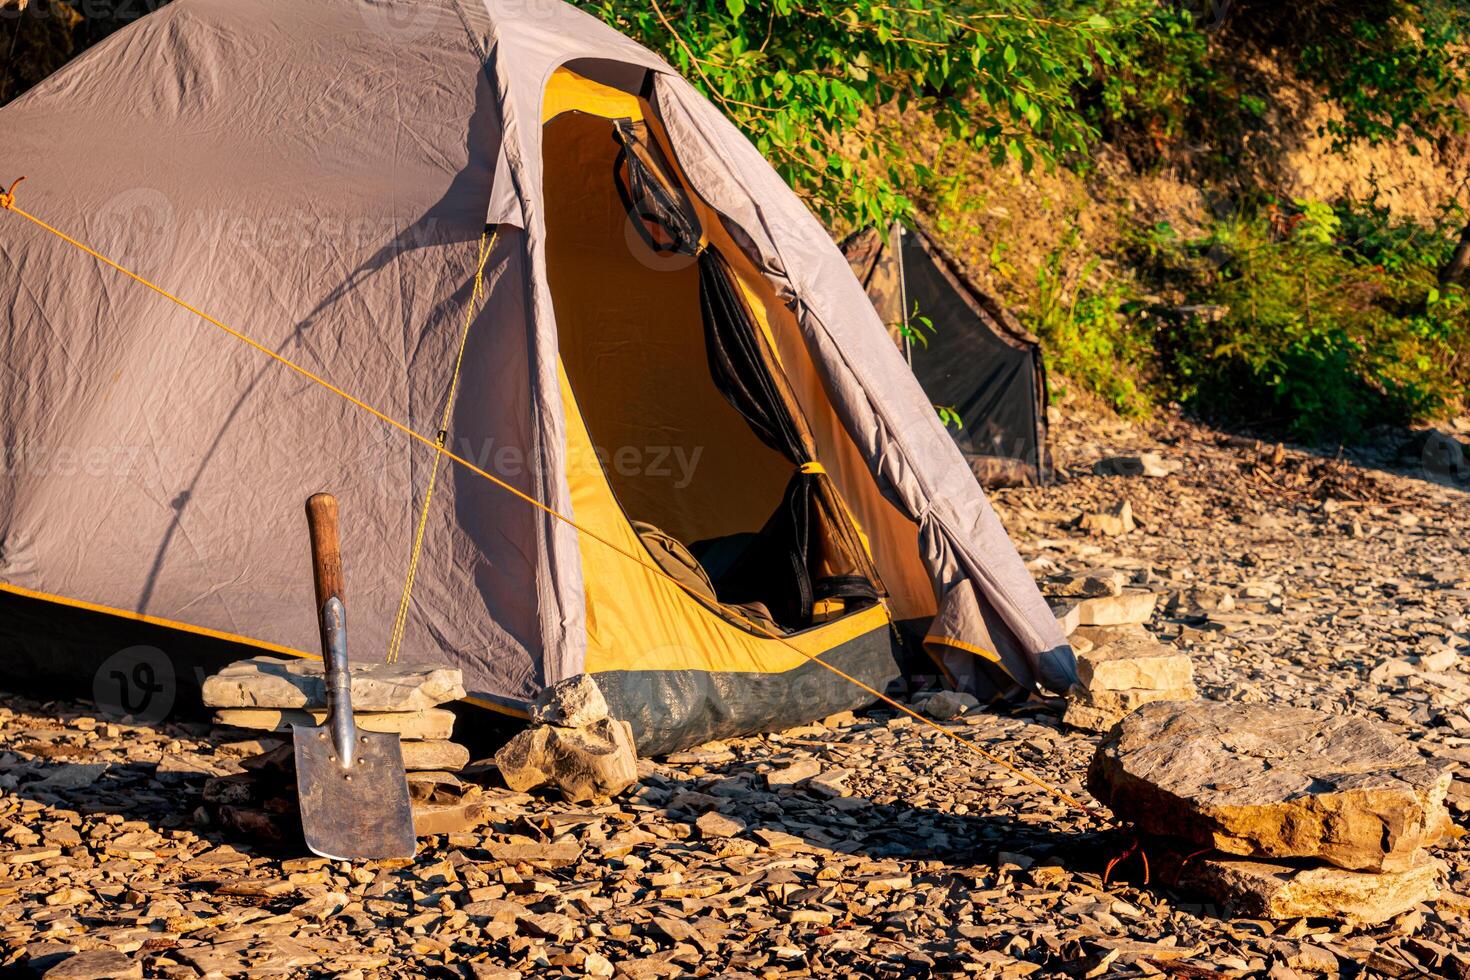 hike camp on a rocky shore, dome frame tent photo